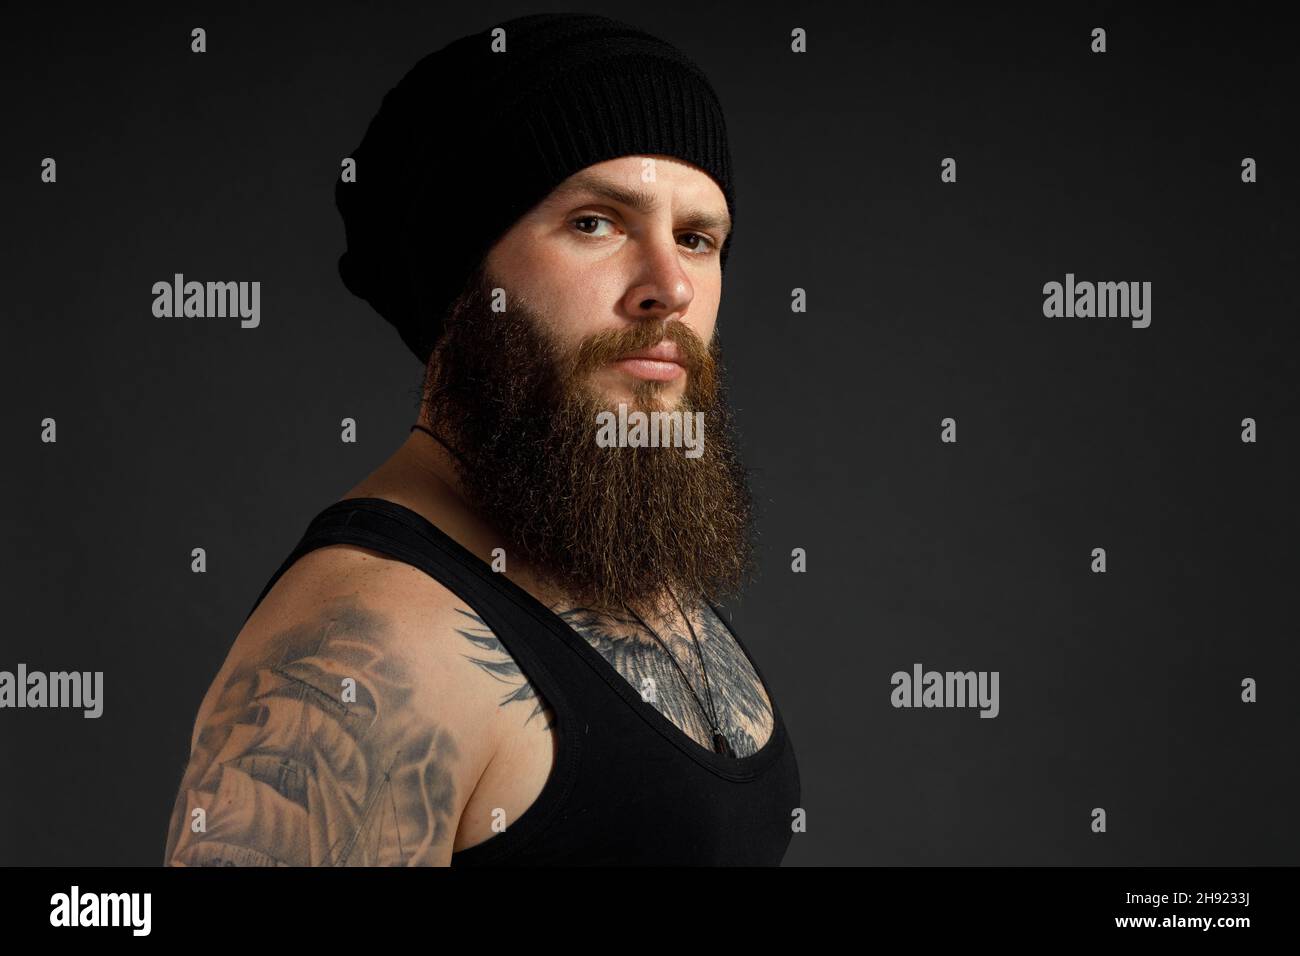 portrait of a handsome bearded man in a black t-shirt and hat looking at the camera. Stock Photo